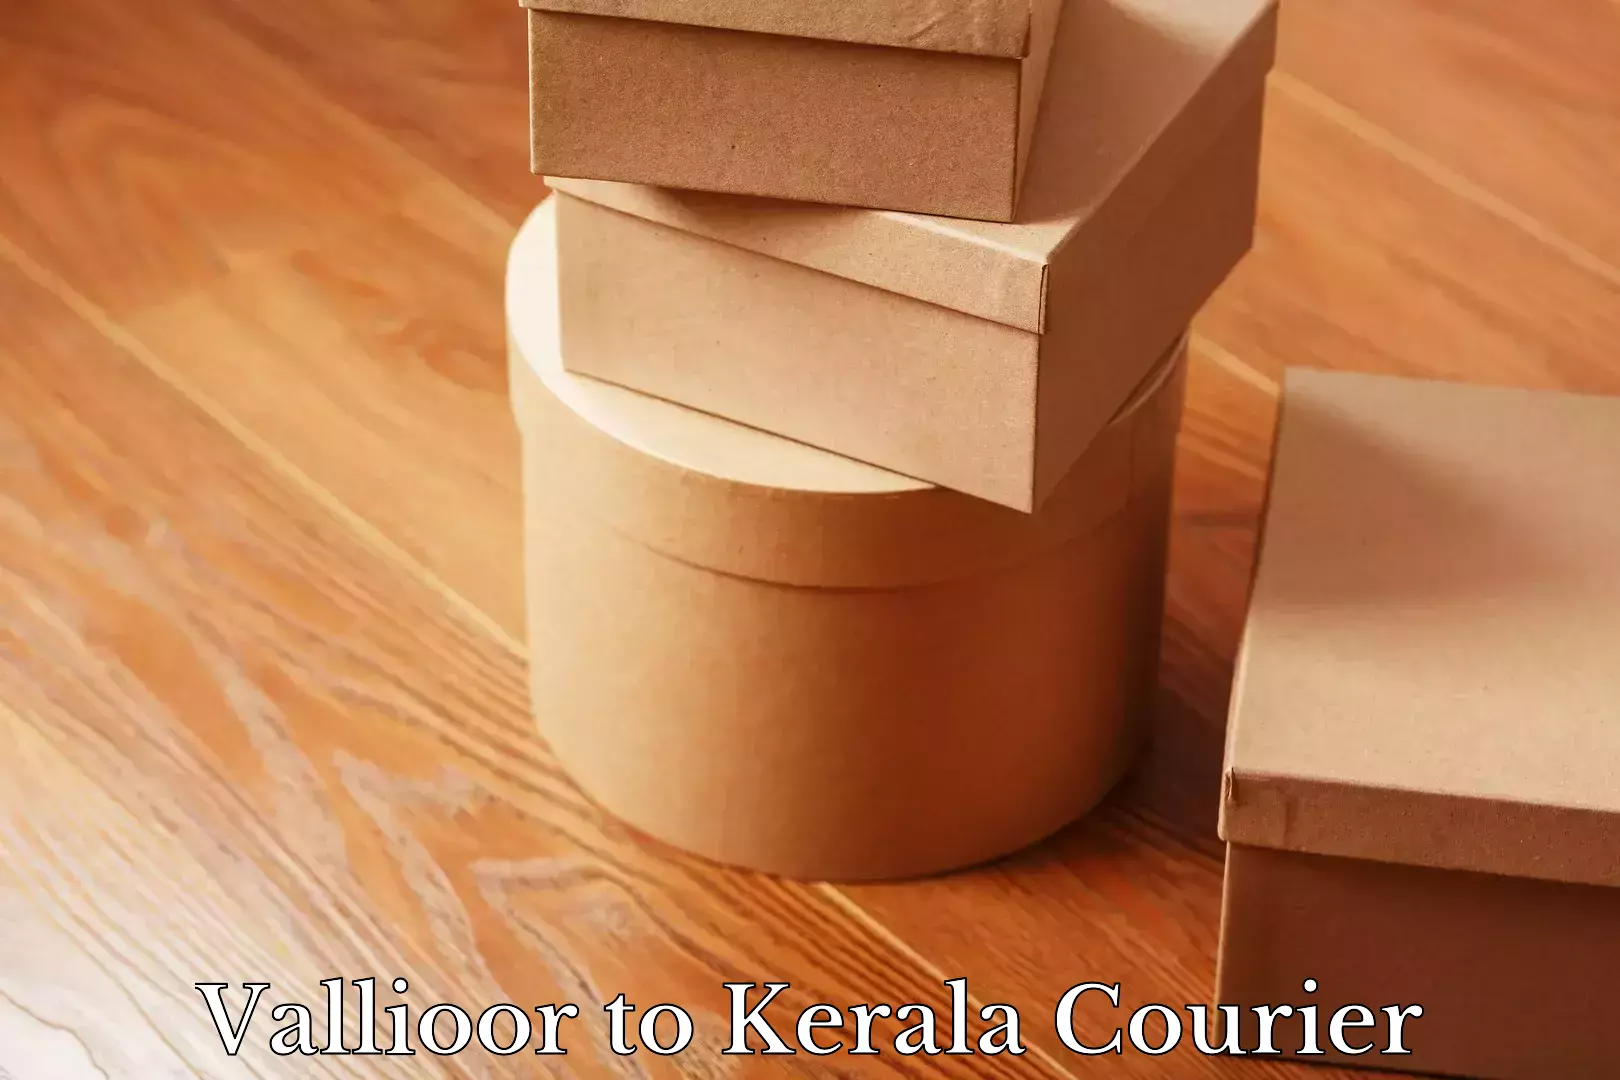 Overnight delivery services Vallioor to Kerala